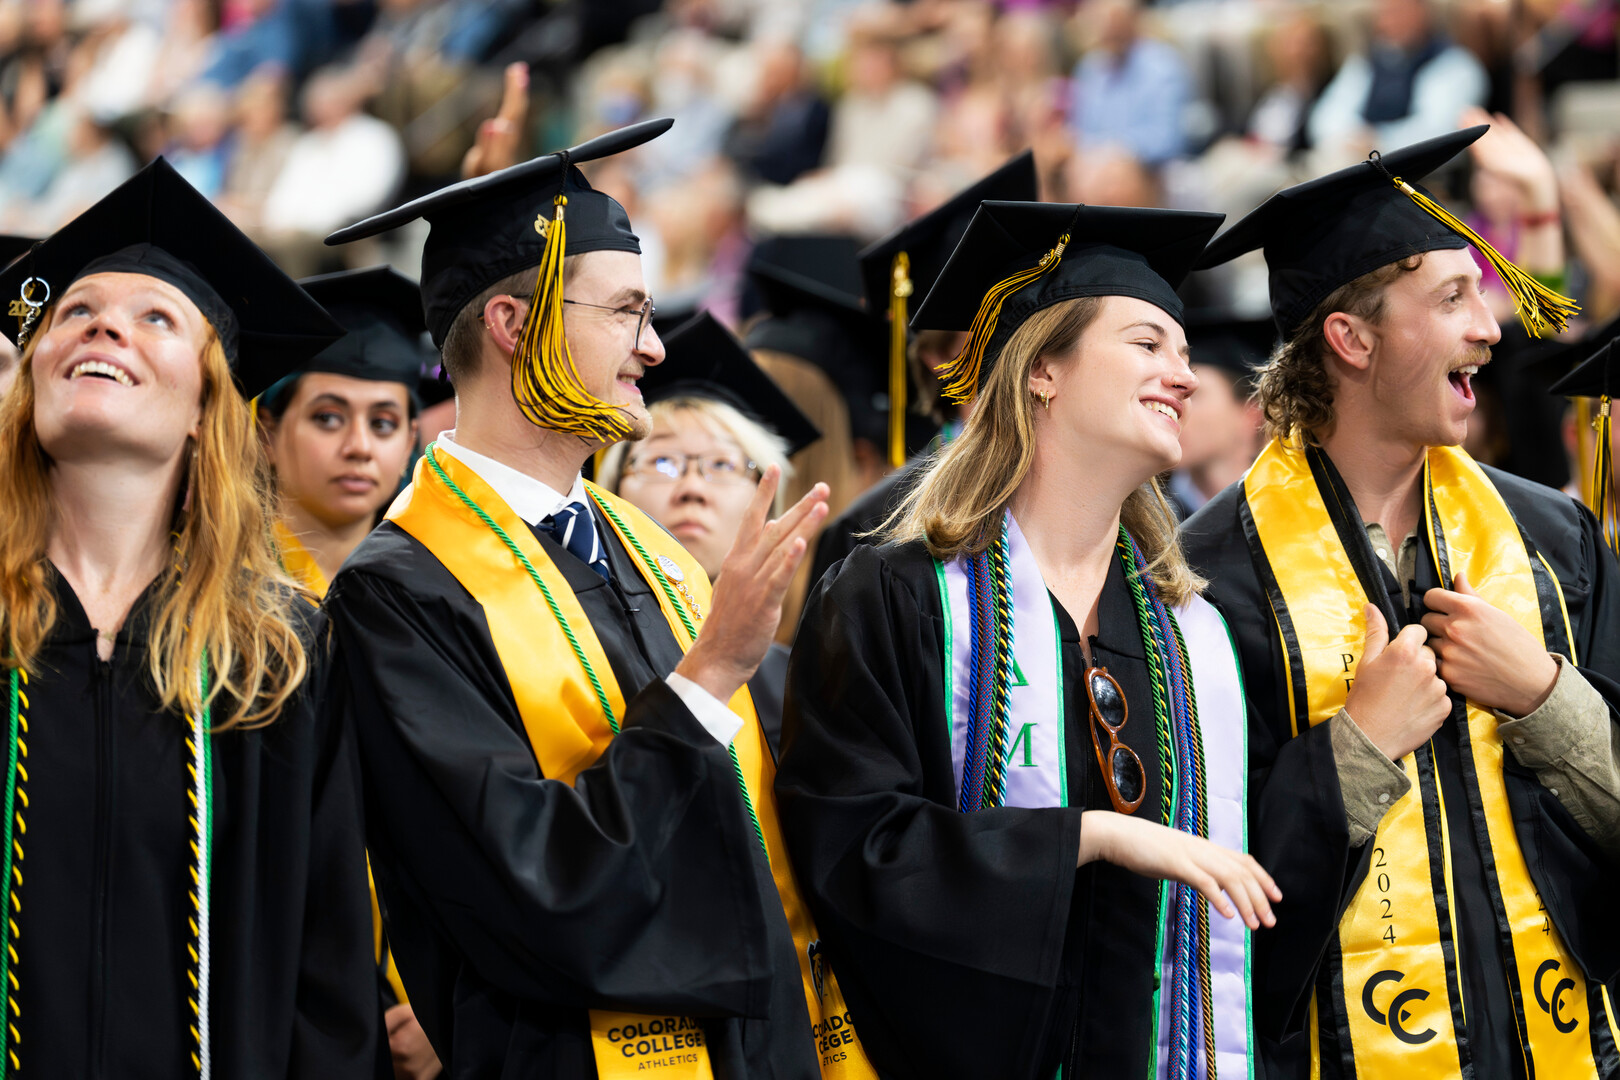 Spring Commencement 2023 on 5/28/23. Photo by Lonnie Timmons III / Colorado College.